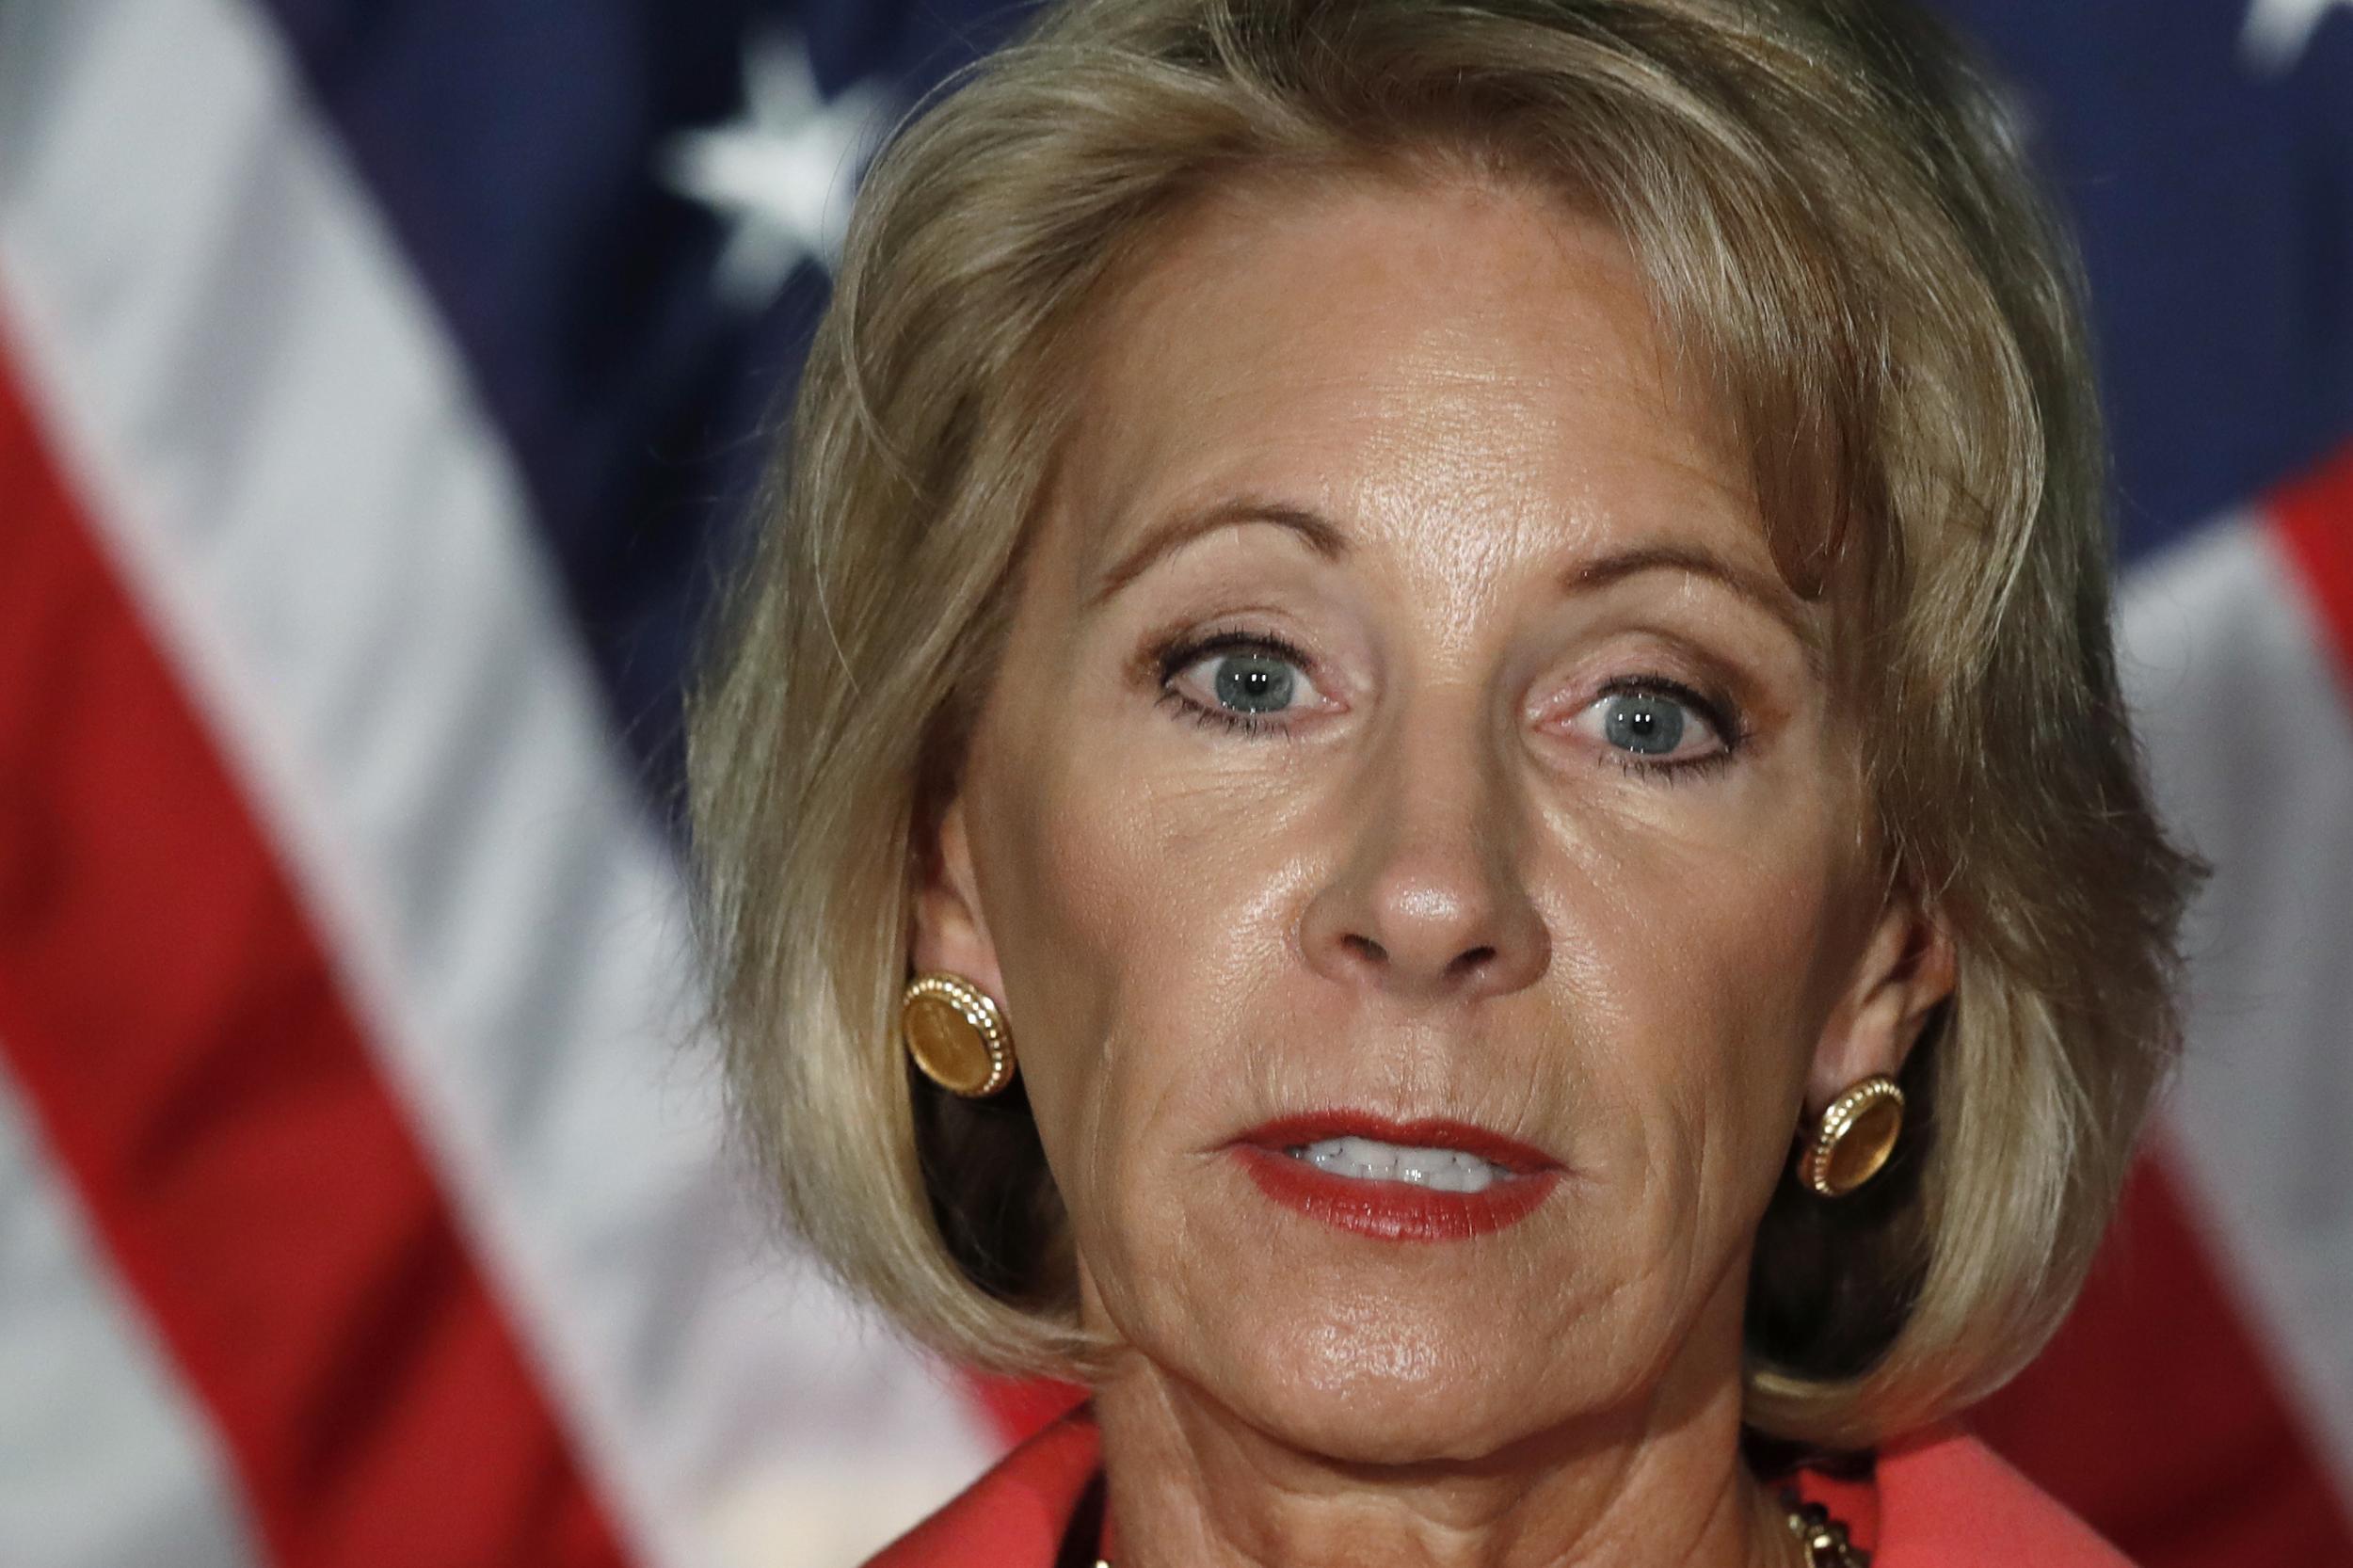 Trump Education Secretary Betsy Devos To End Obama Era Rules On Campus Sexual Assault The